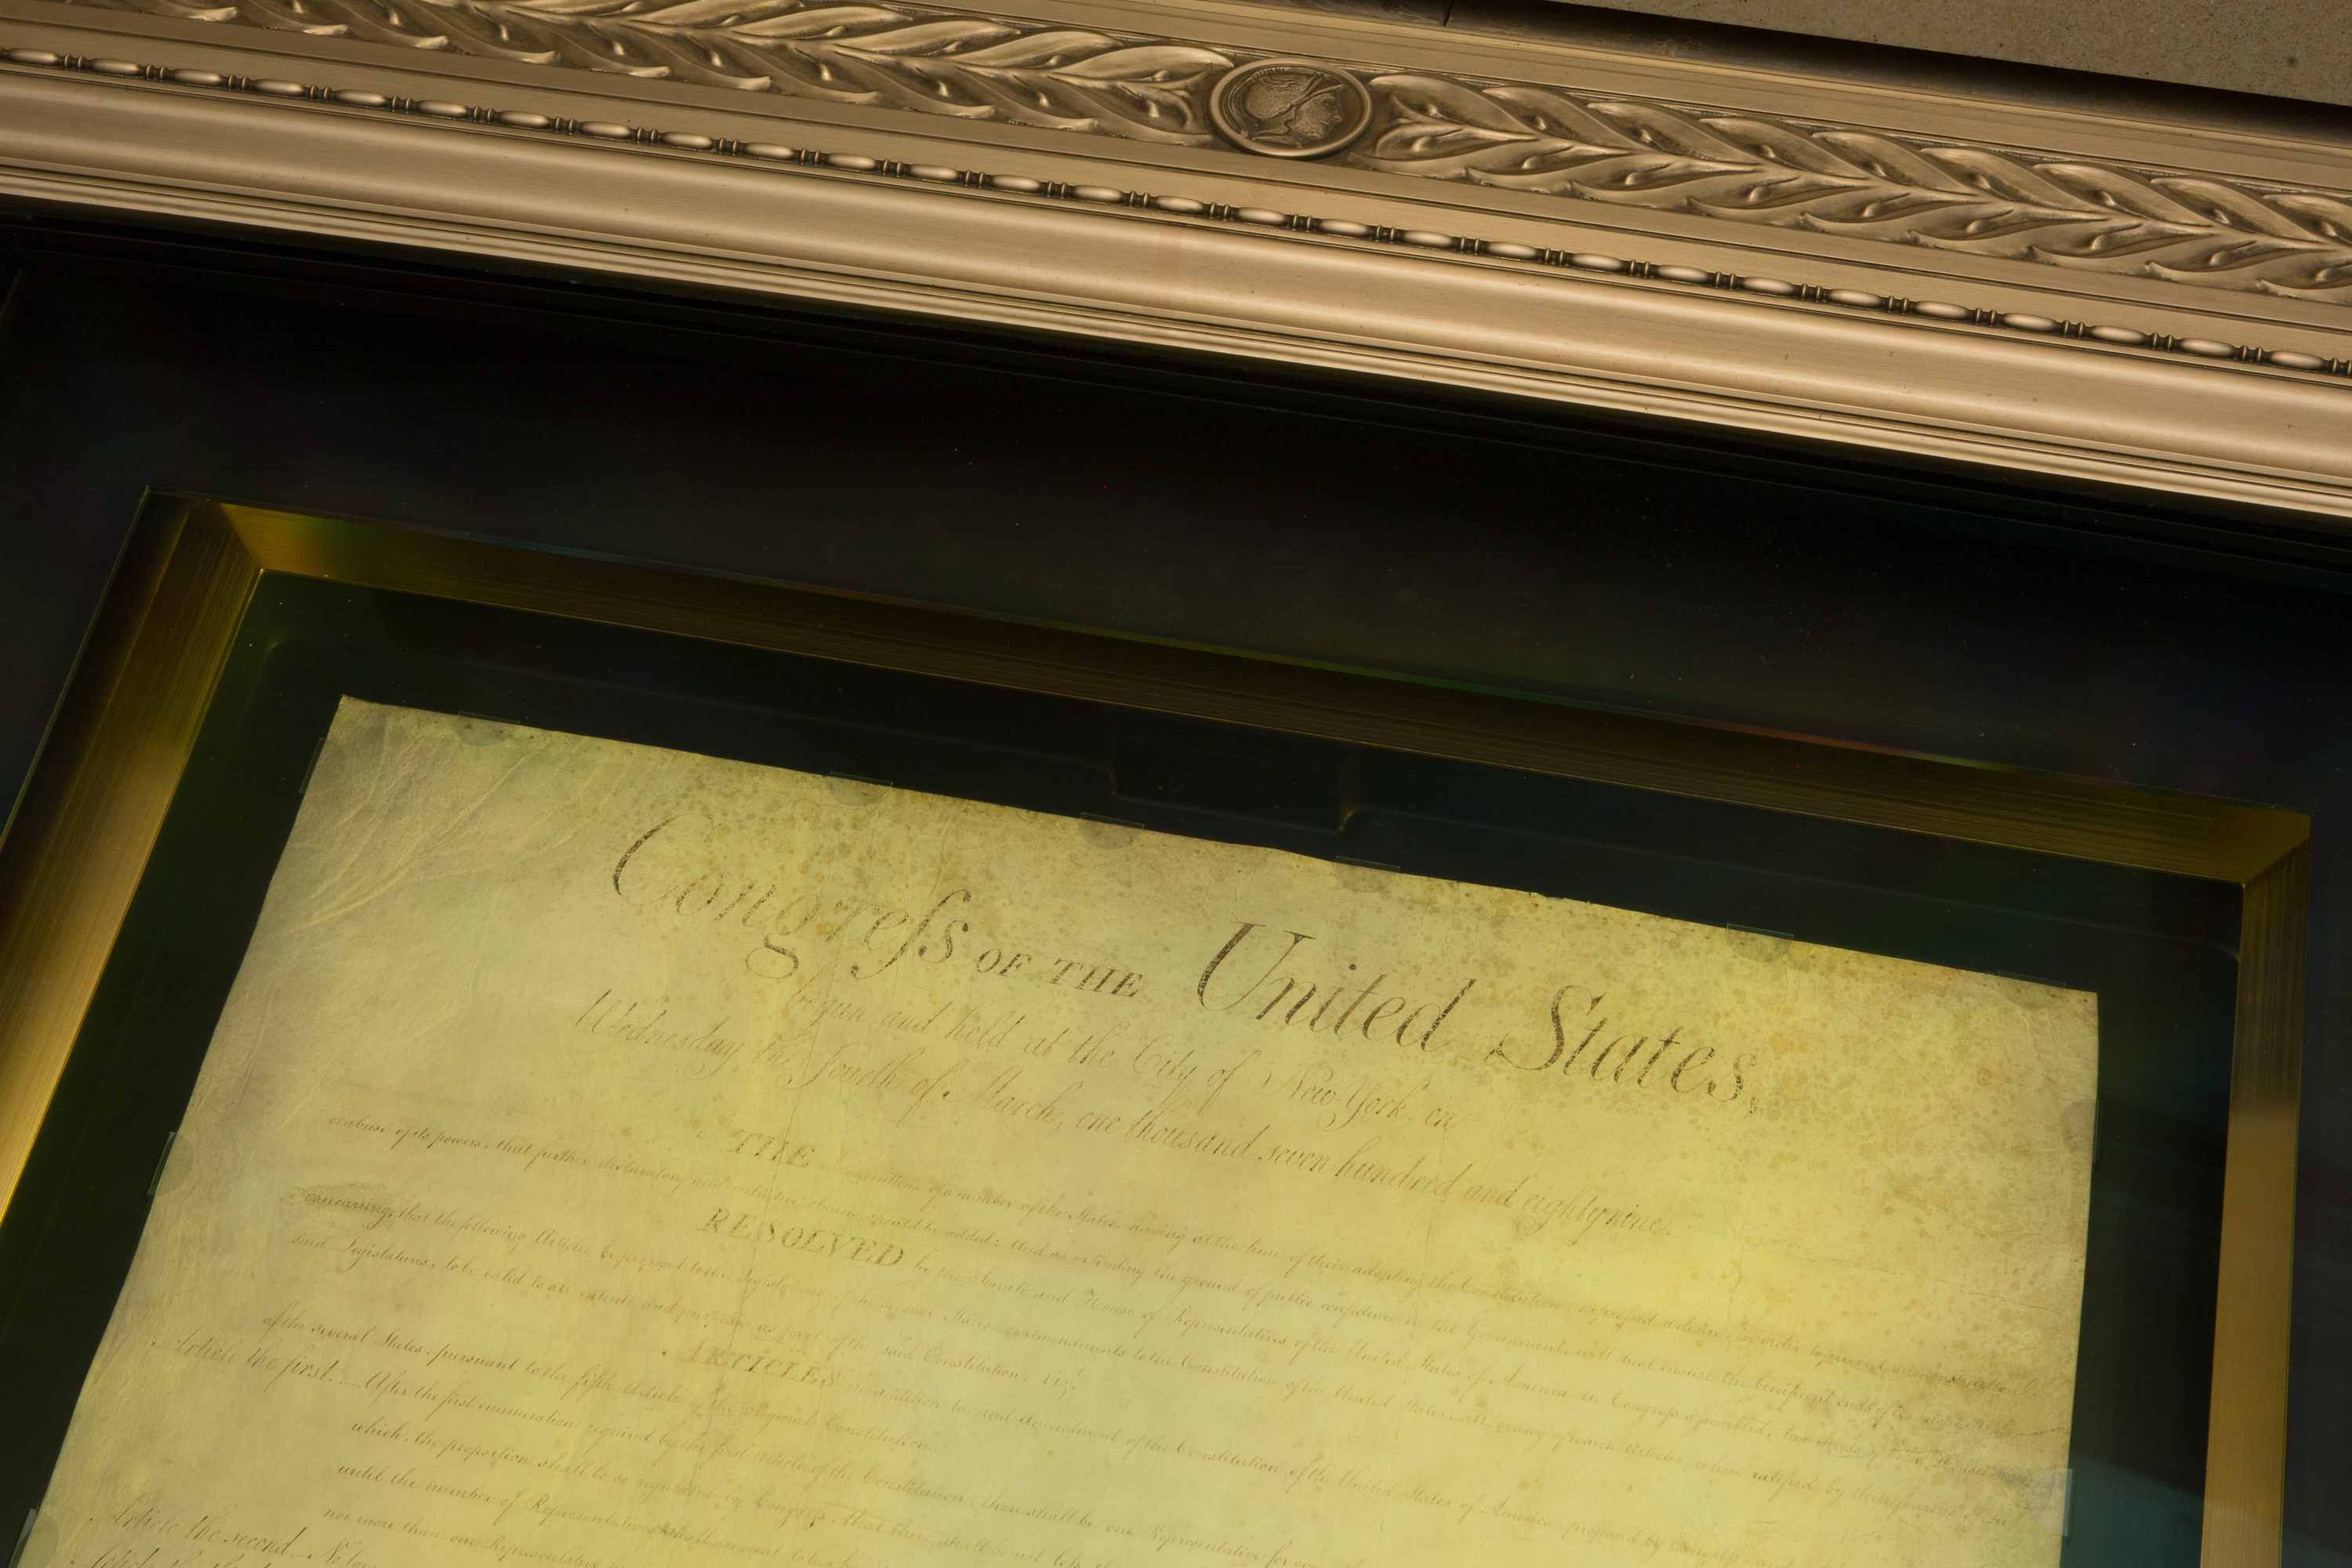 founding-documents-in-the-rotunda-for-the-charters-of-freedom